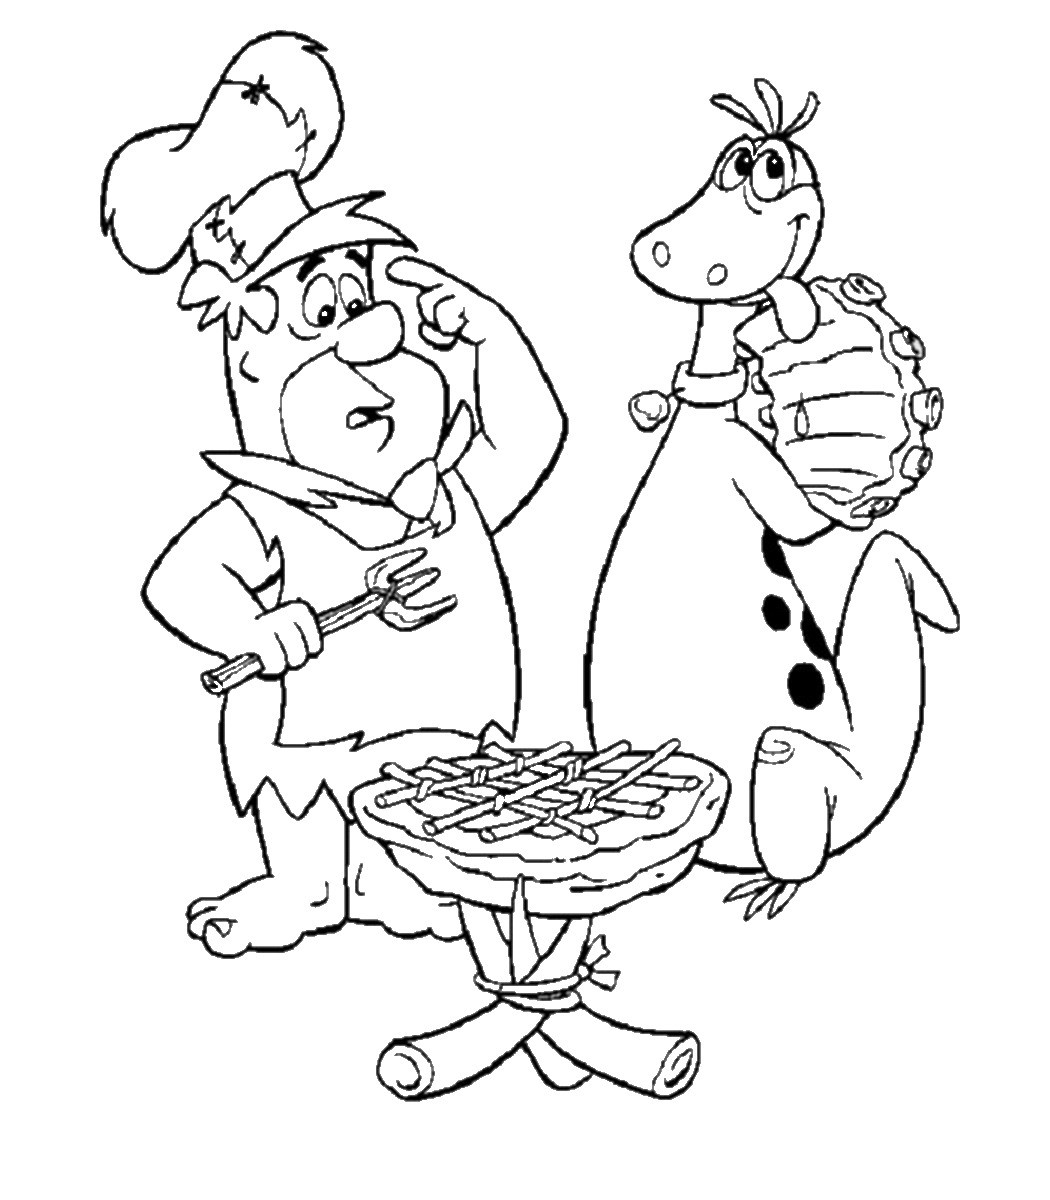 Free Online Coloring Books
 The Flintstones Coloring Pages